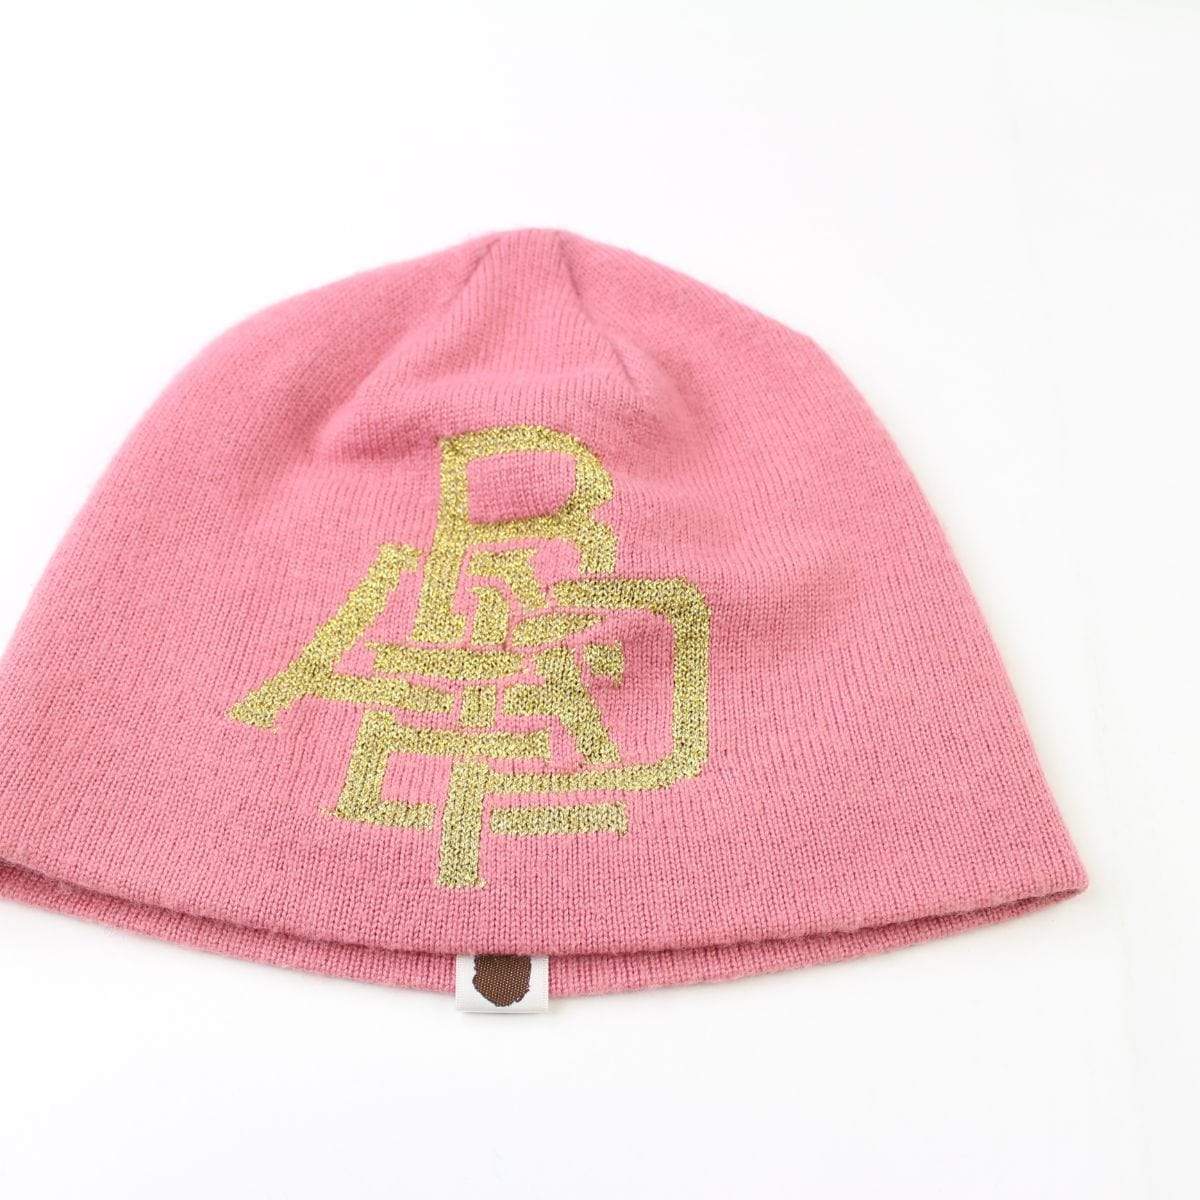 Bape text Pink Beanie - SaruGeneral